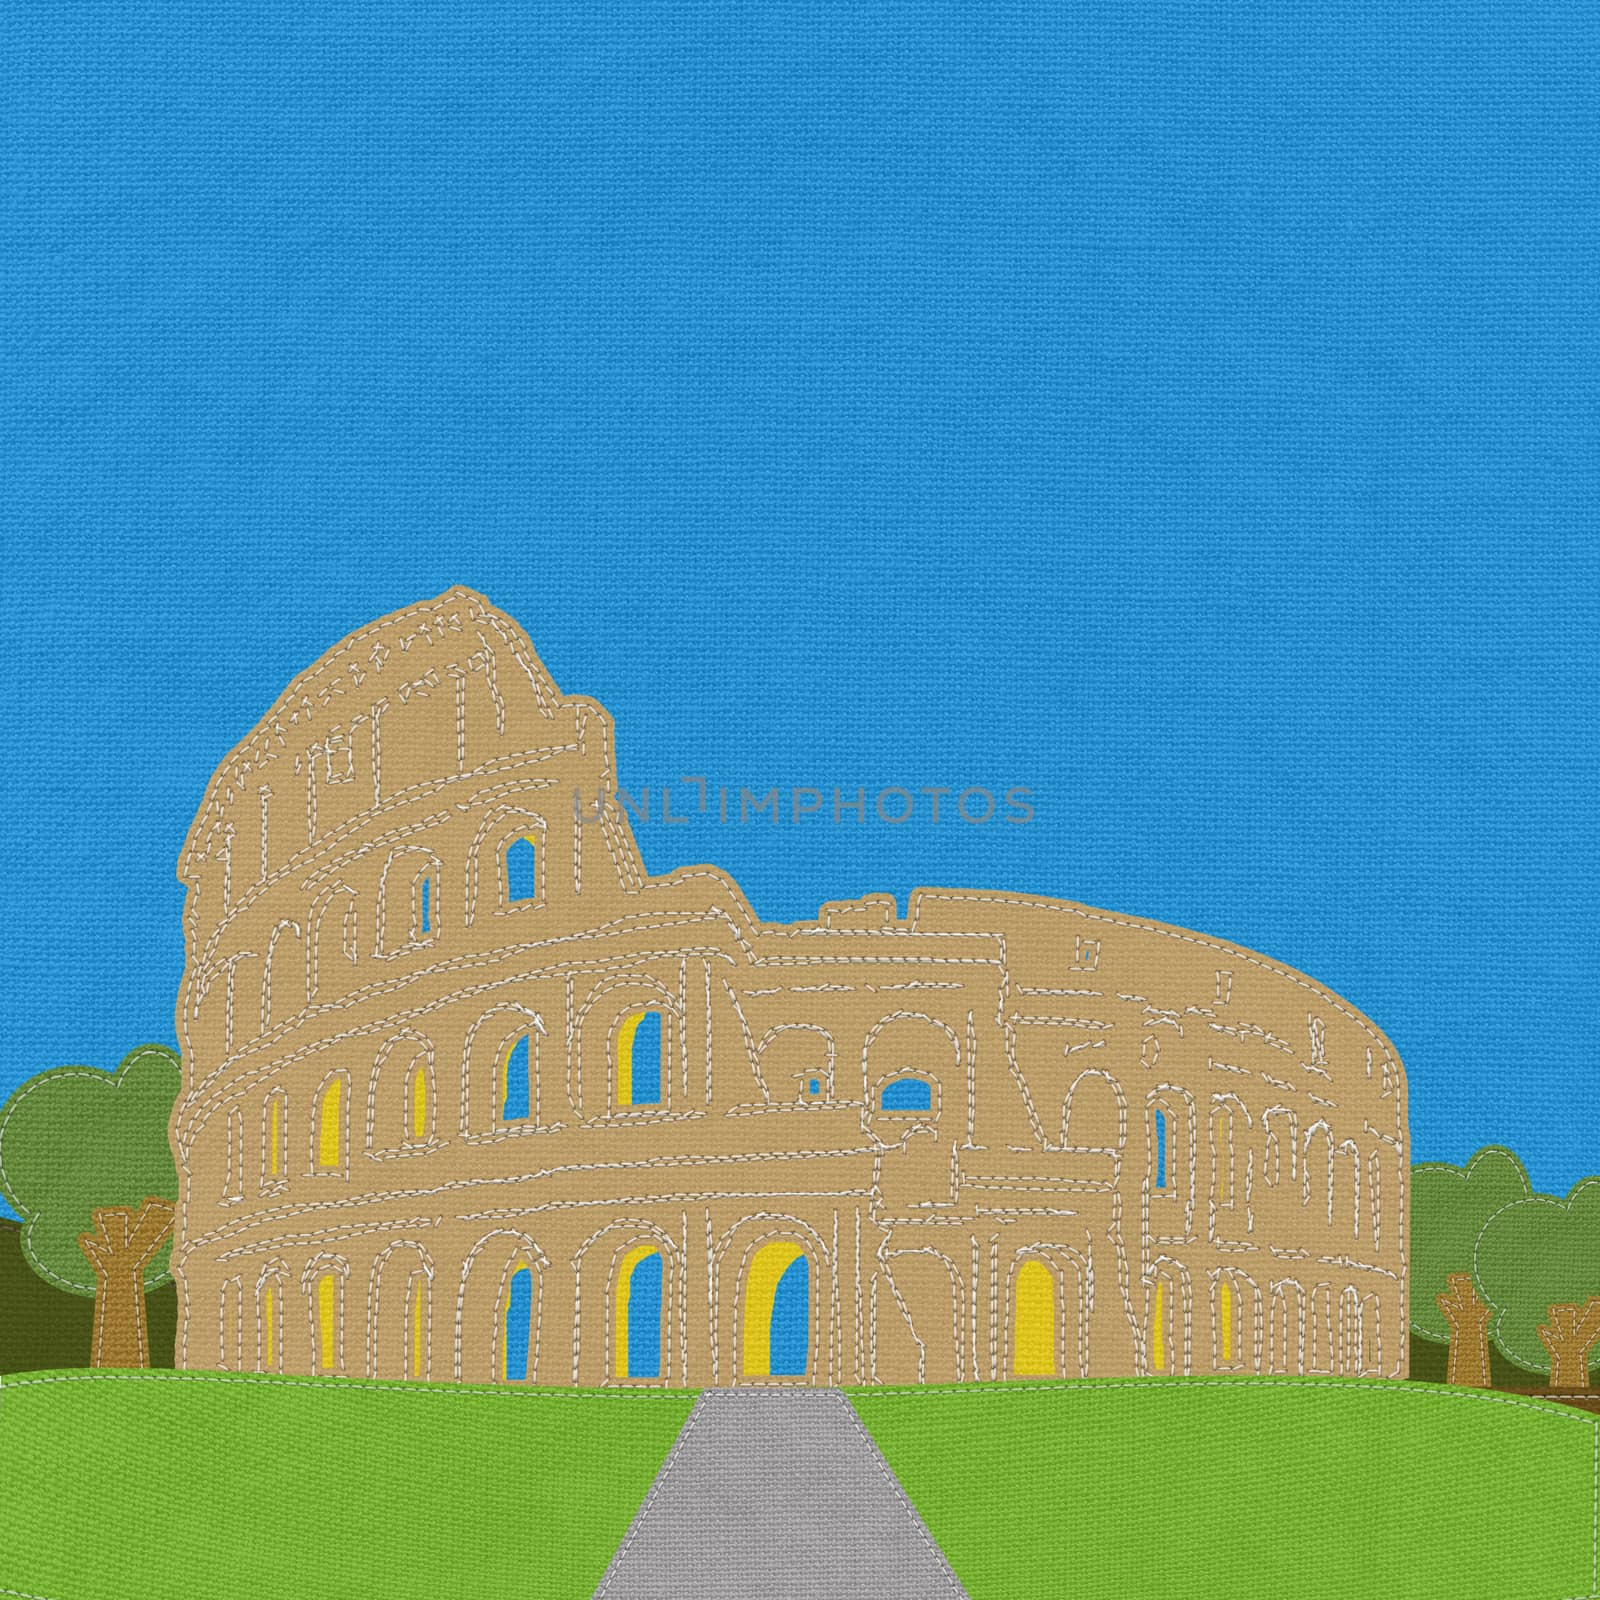 Colosseum in rome with stitch style on fabric background by basketman23